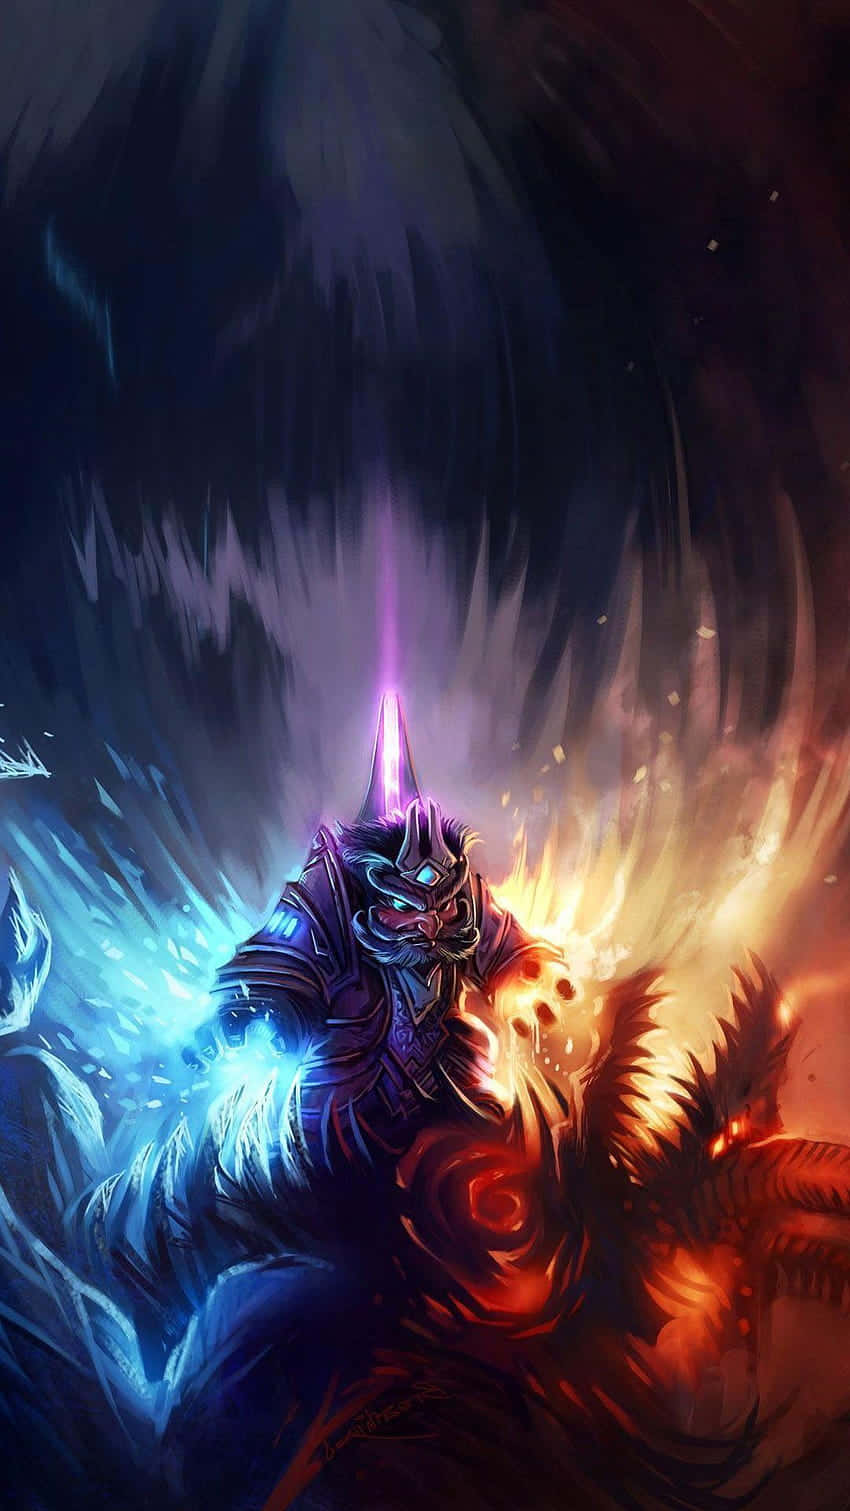 Adept Warlock Character From World Of Warcraft Game Wallpaper